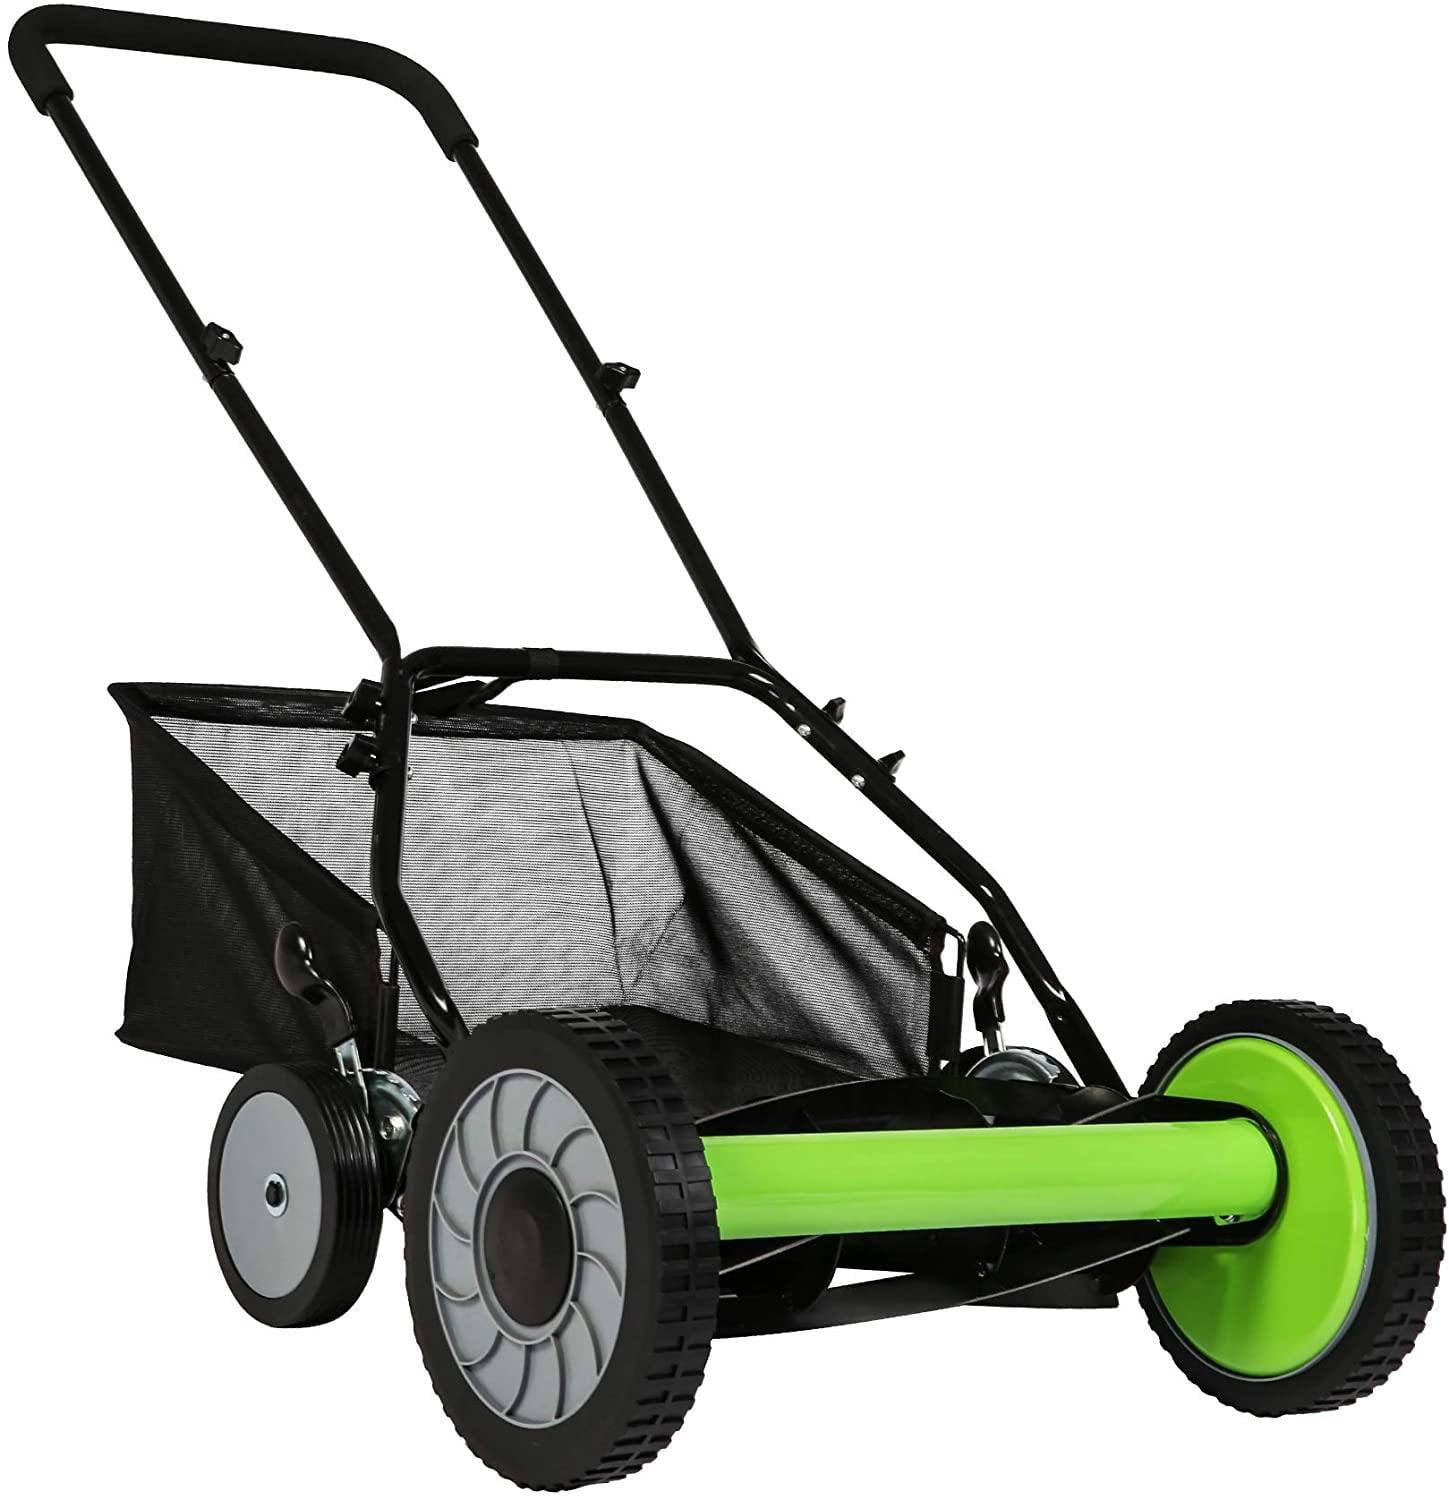 Reel Mower 16inch, Reel Lawn Mower with Adjustable Mowing Height, 5 Blades  and Collection Bag, Push Reel Lawn Mower Walk-Behind Lawn Mowers for